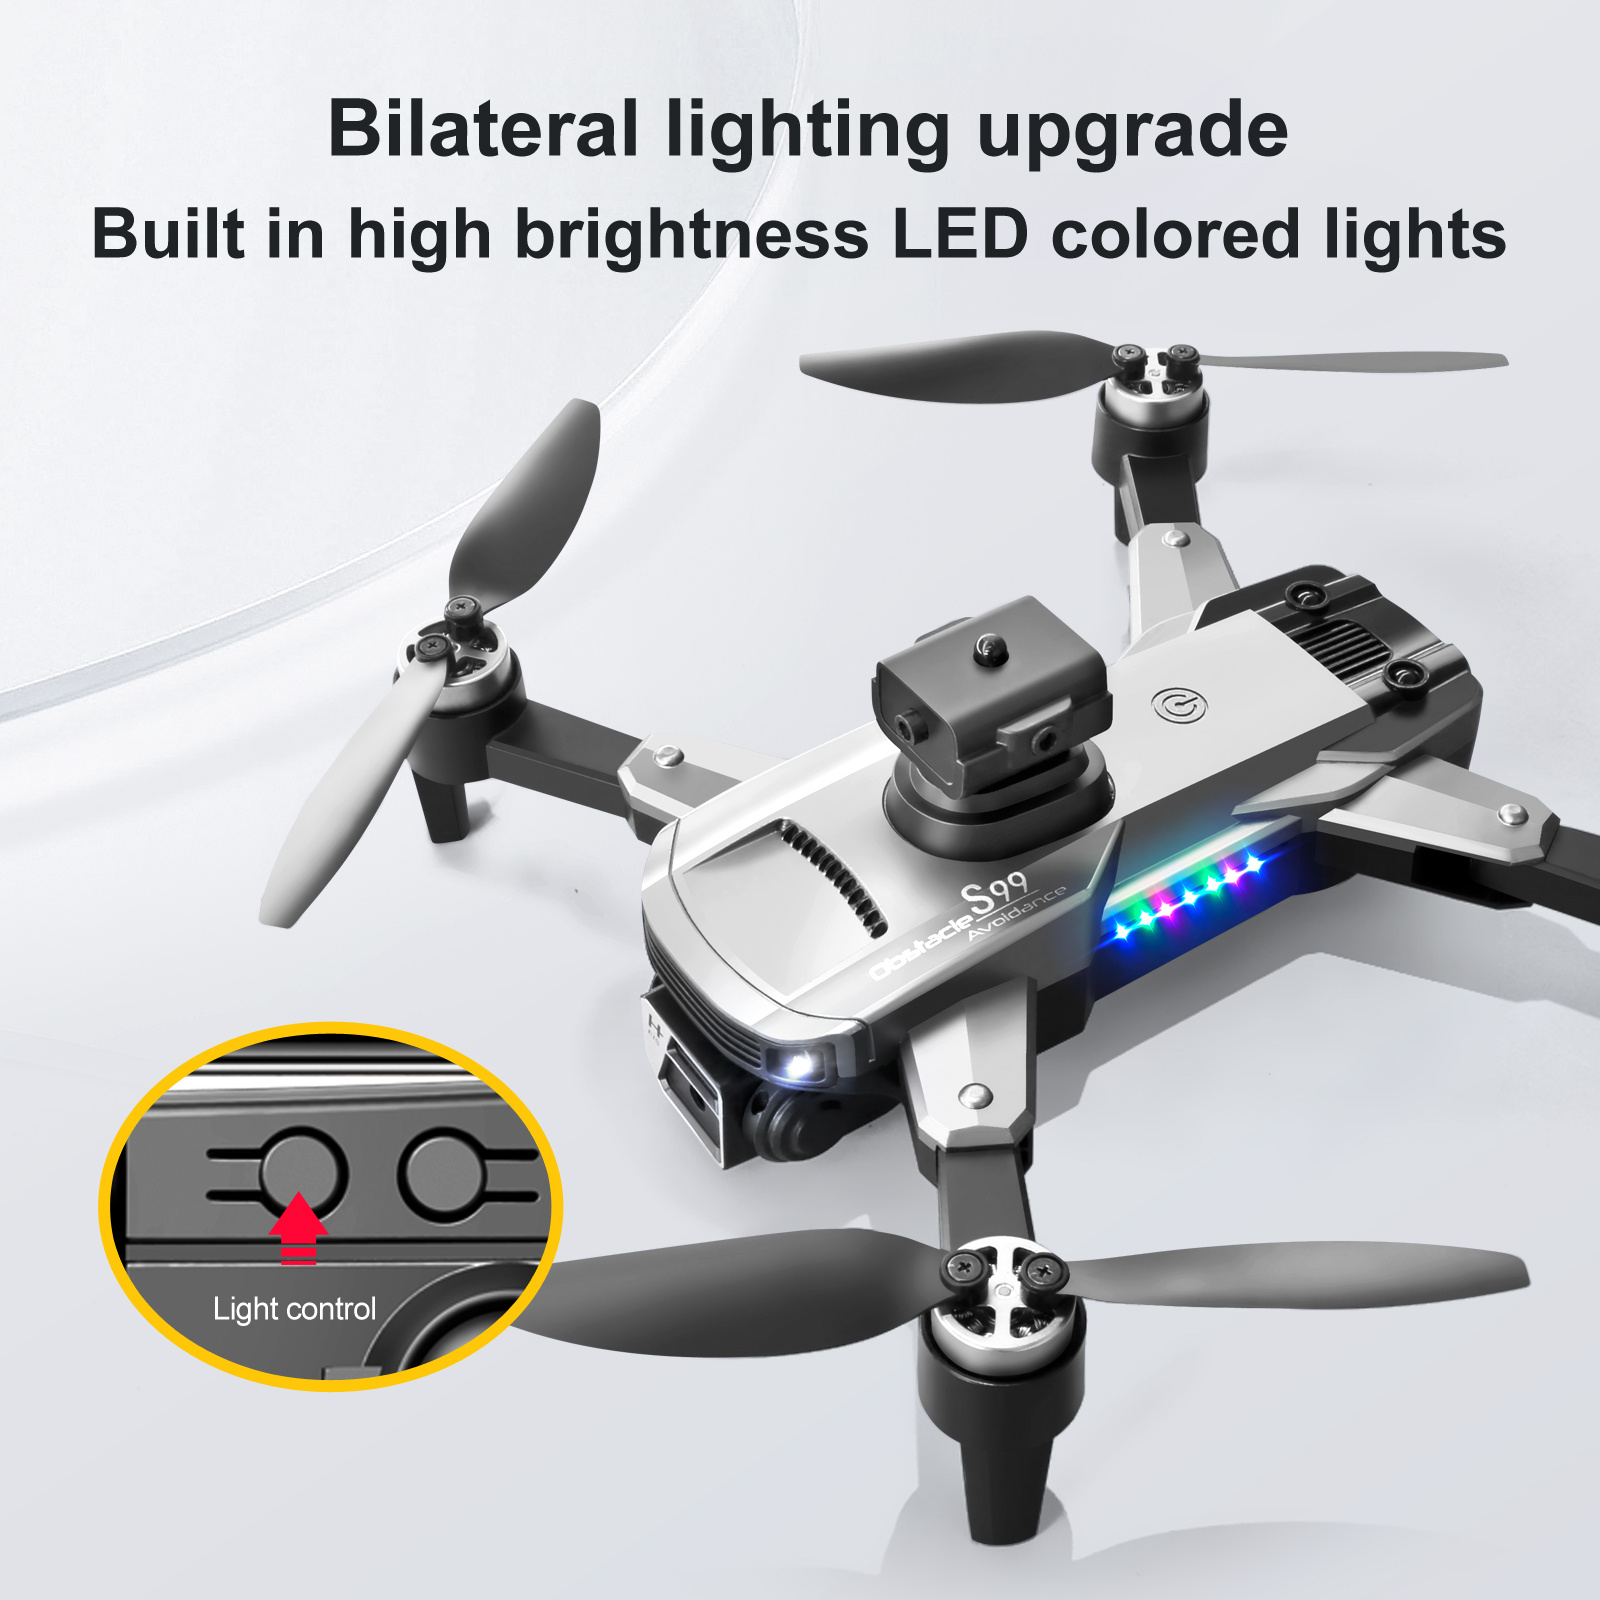 paxa s99 5g gps drone led colored lights hd real time aerial photography obstacle avoidance quadrotor helicopter rc distance 100m uav details 6